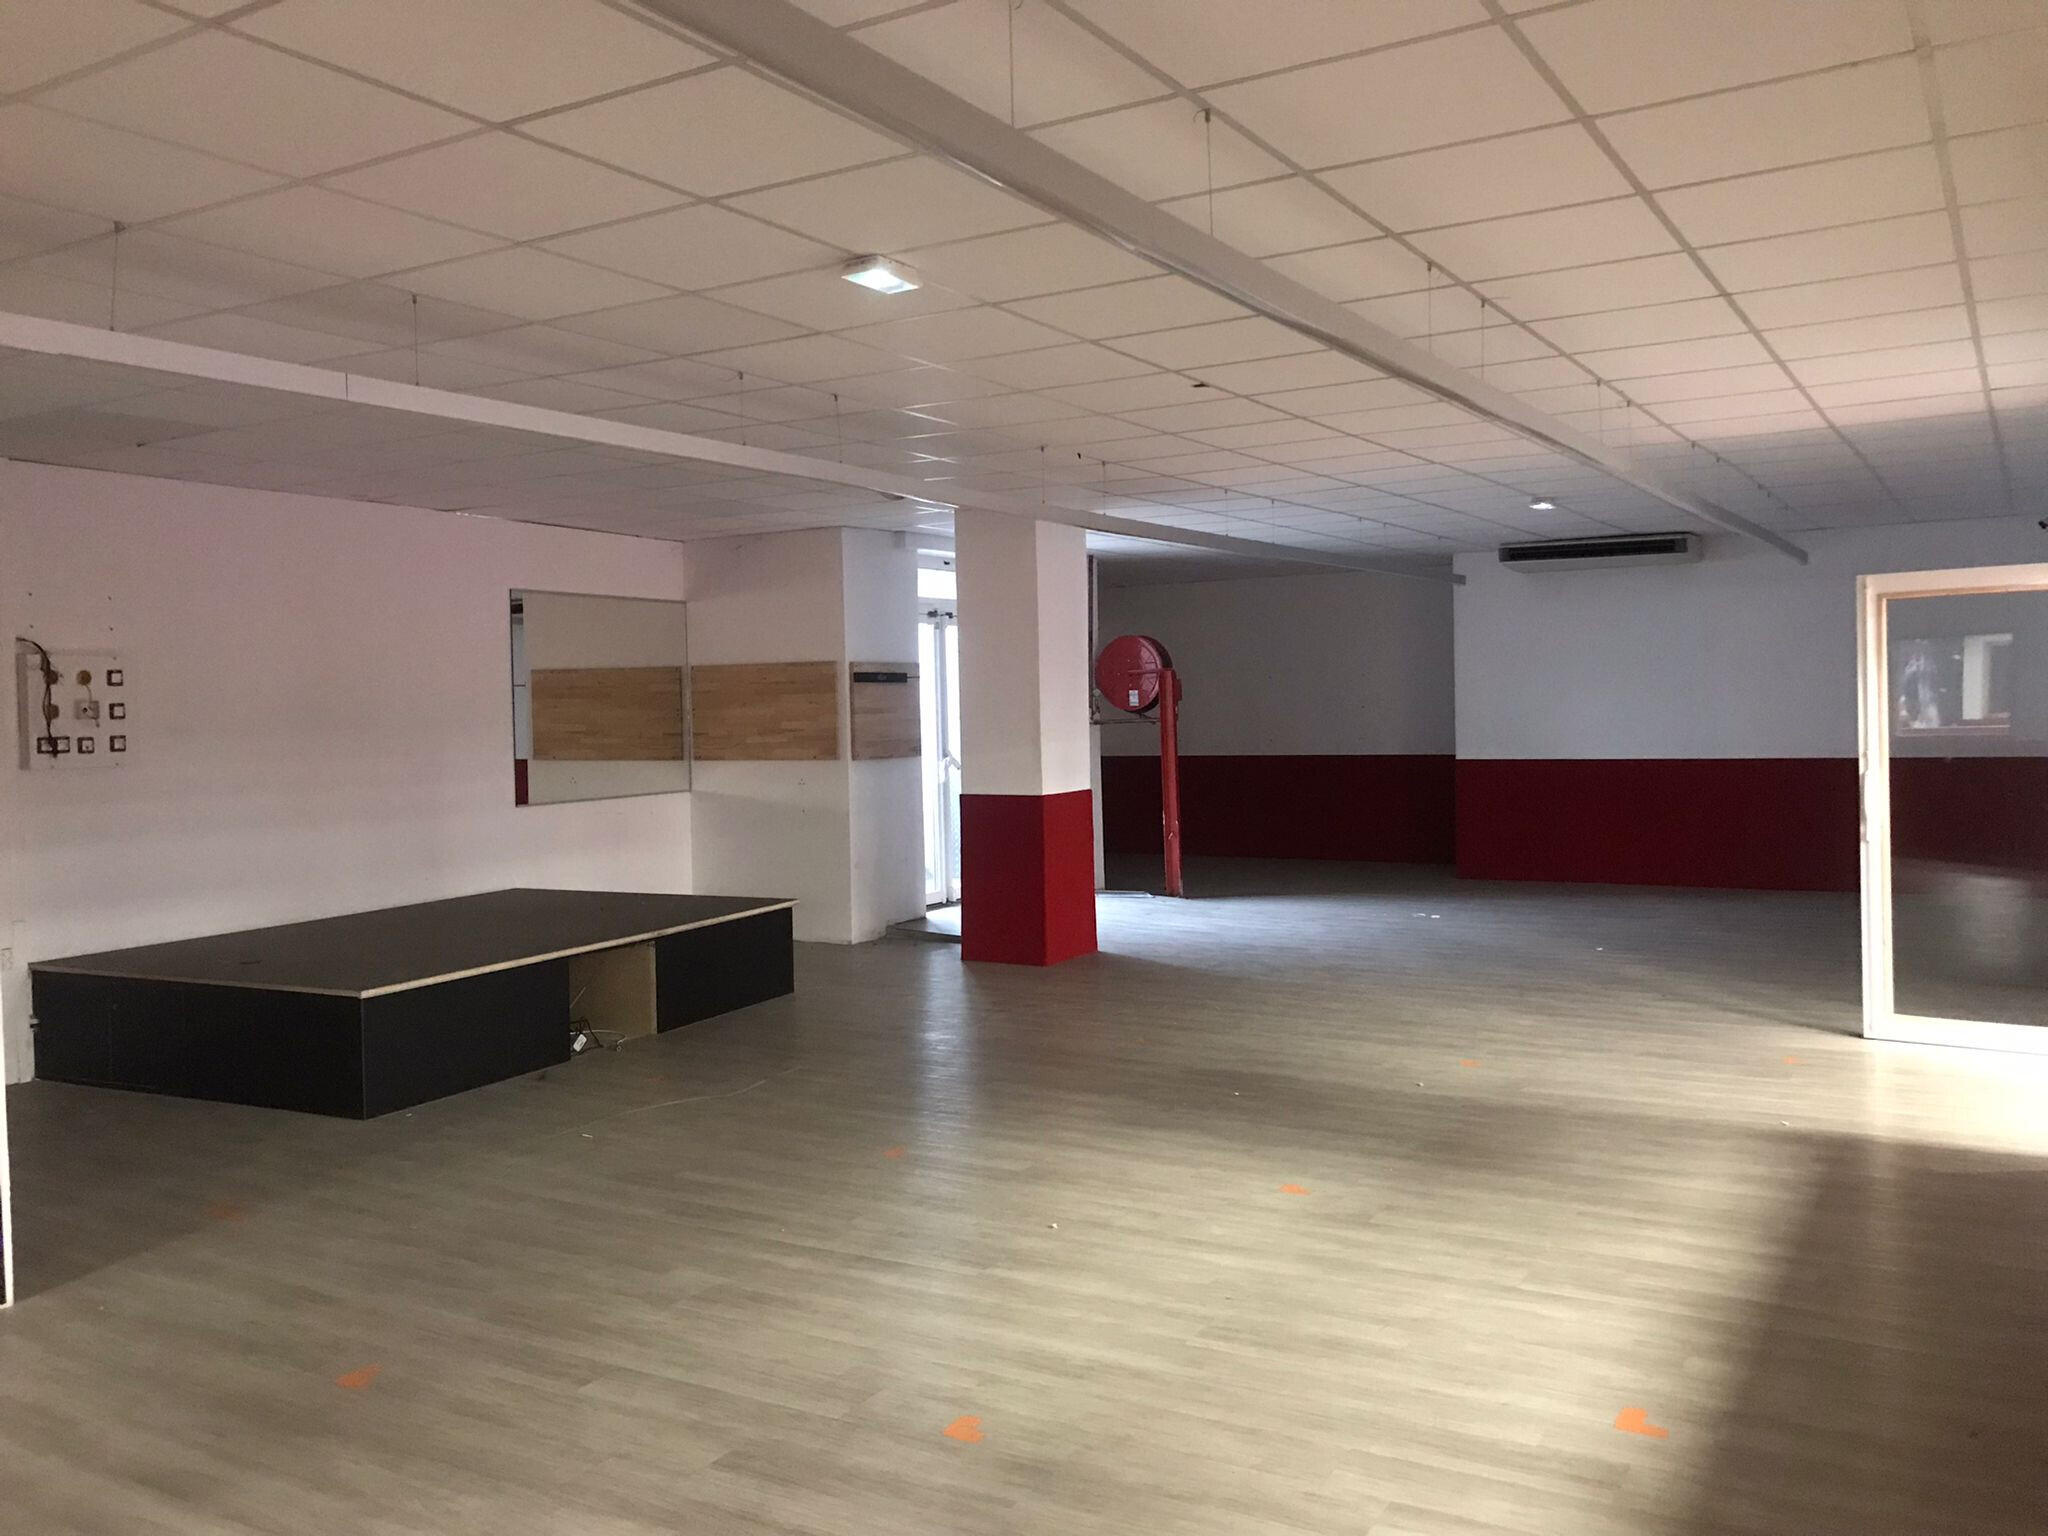 Location grand local commercial 500m² à Nice Nord